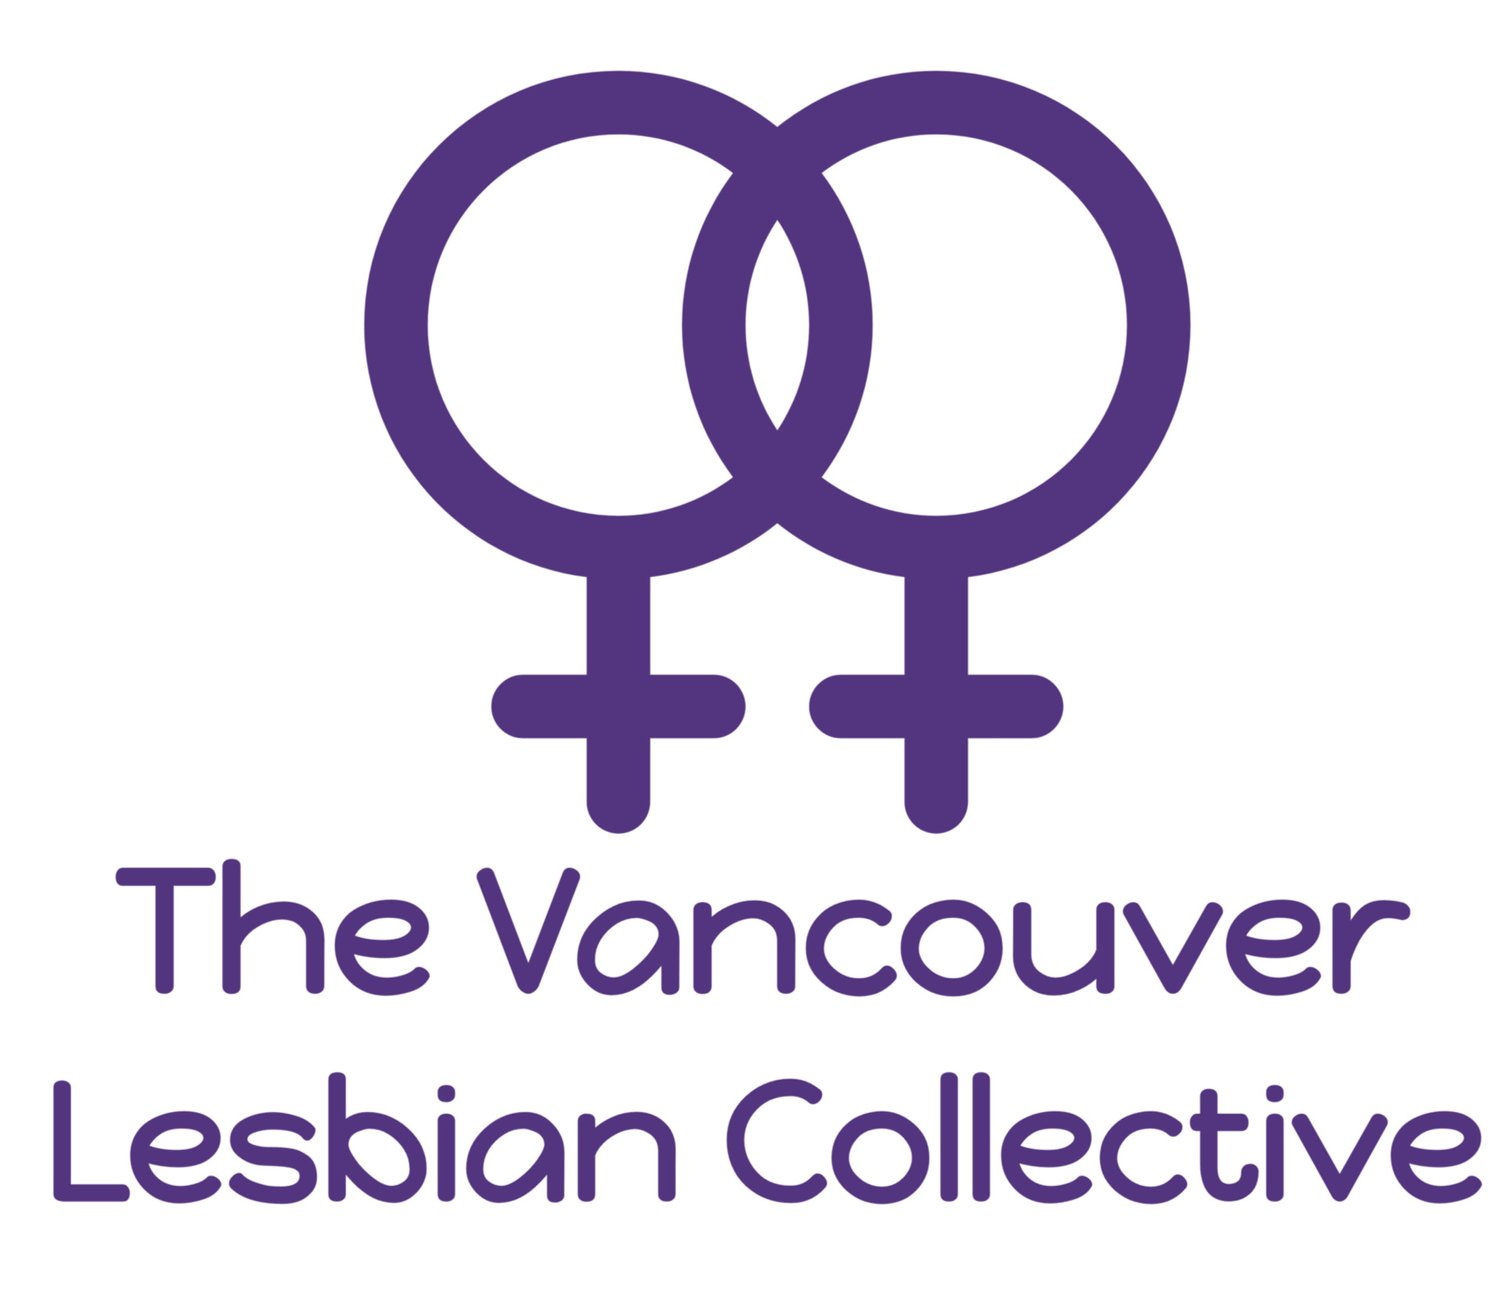 The Vancouver Lesbian Collective